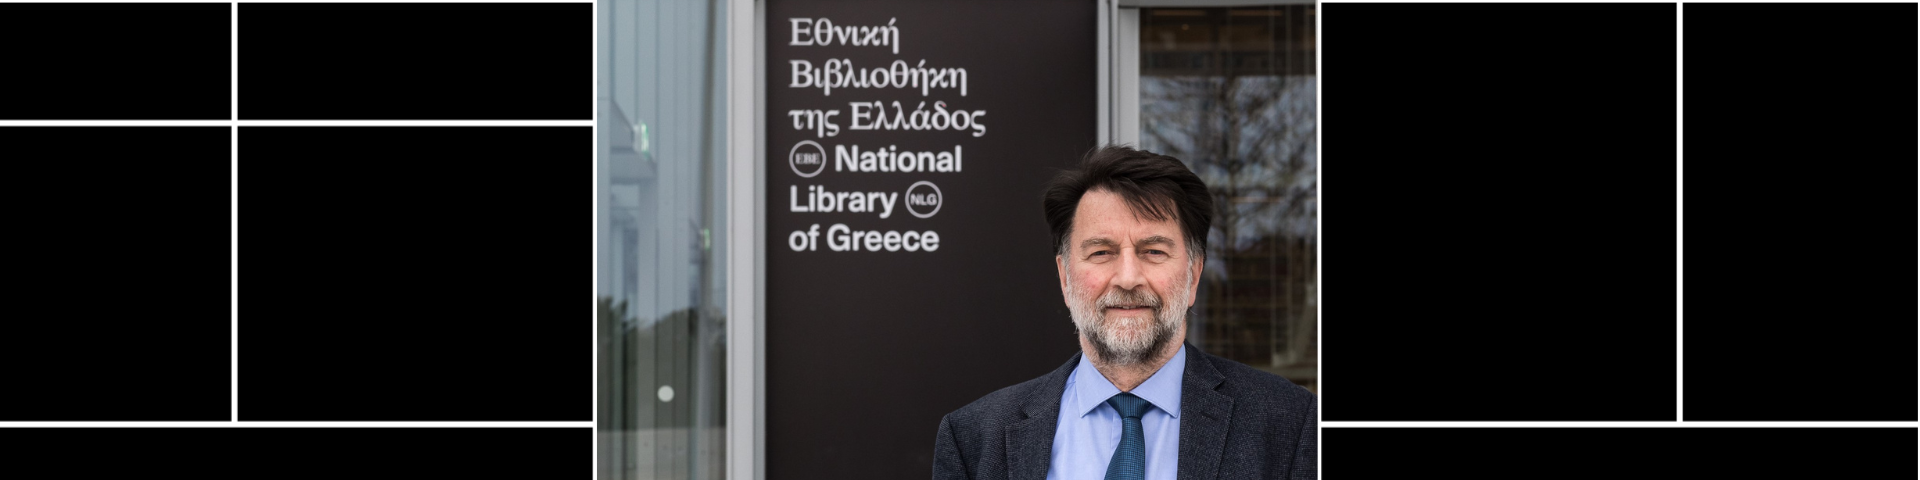 Filippos Tsimpoglou, Director General of the National Library of Greece has passed away - Εικόνα